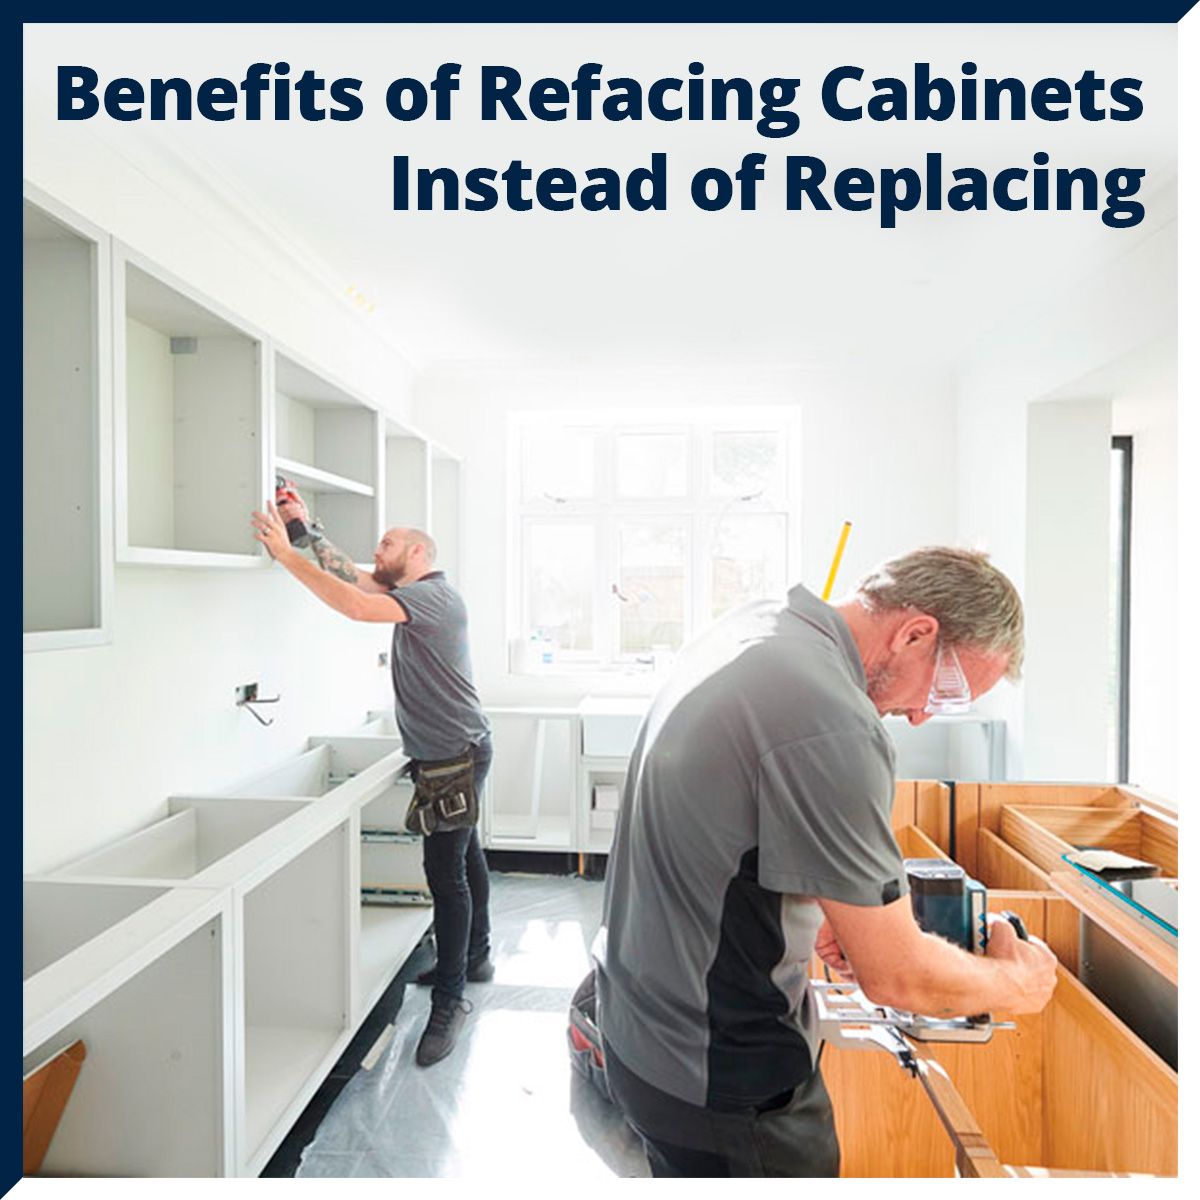 Benefits of Refacing Cabinets Instead of Replacing